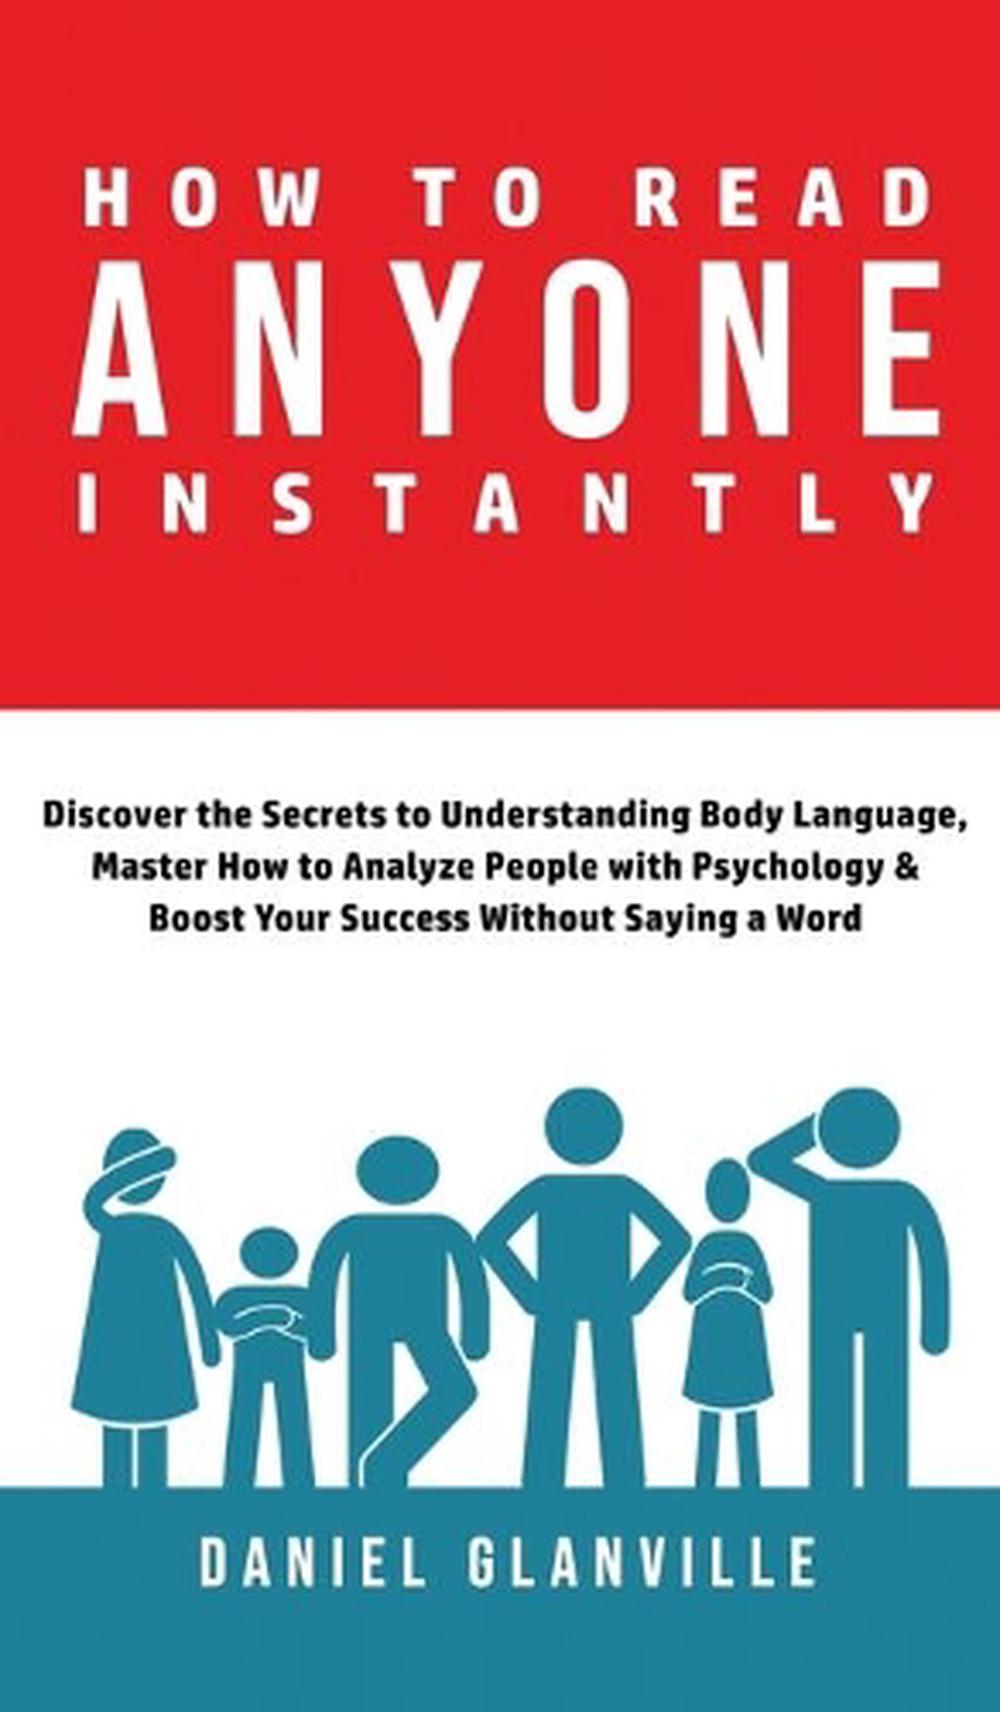 How to Read Anyone Instantly by Daniel Glanville Hardcover Book Free ...